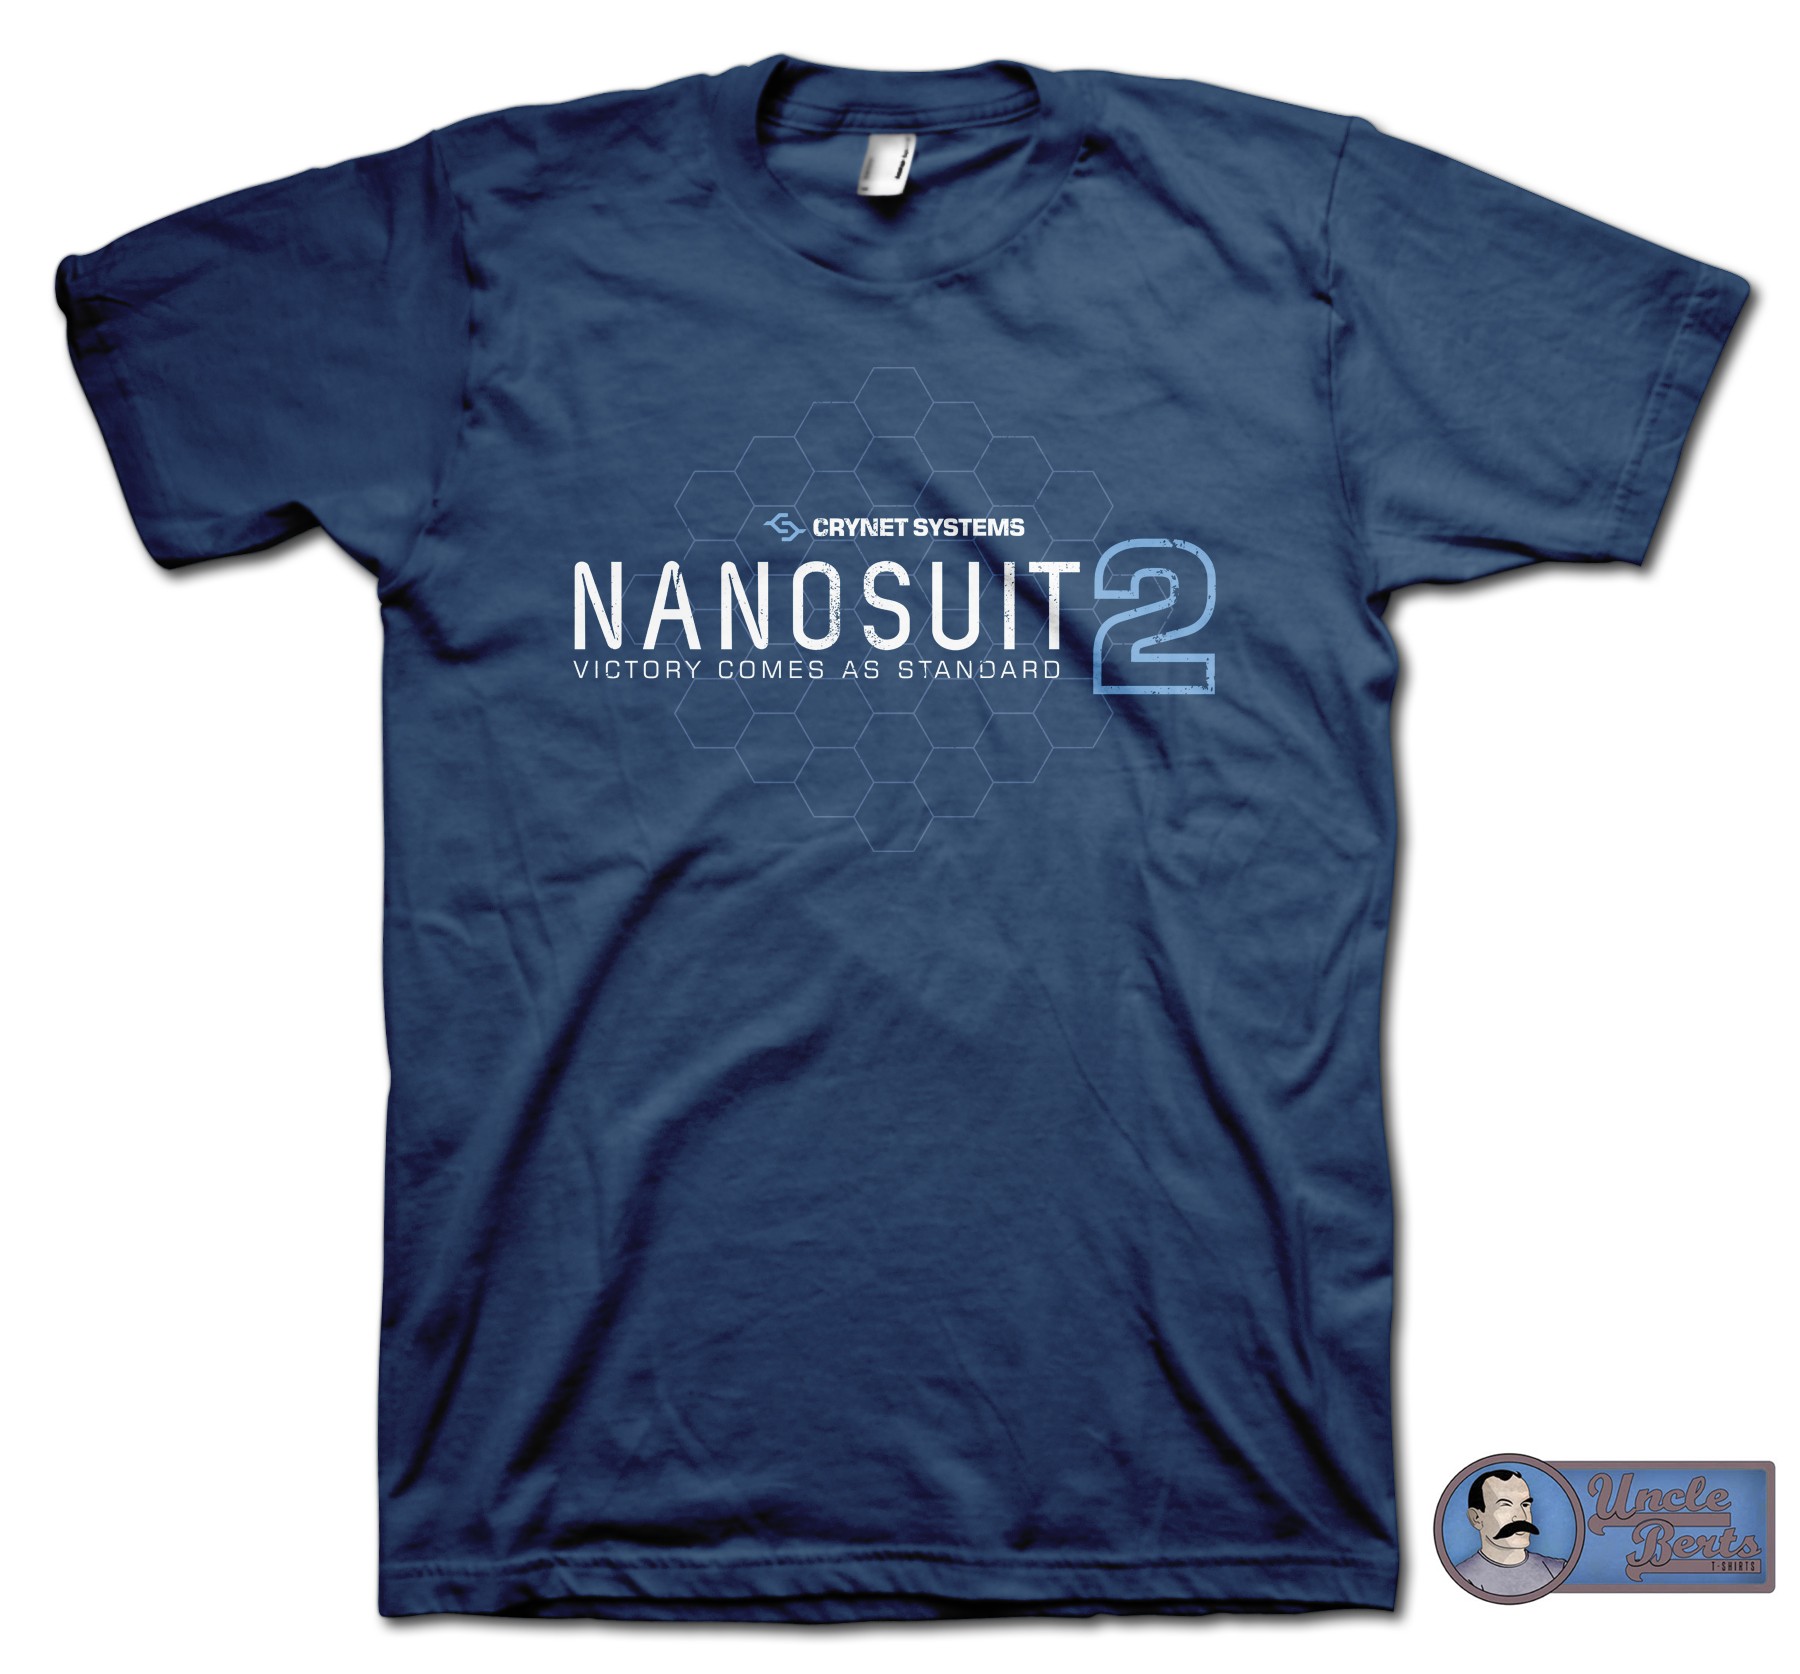 Nonosuit 2 T-Shirt - inspired by Crysis 2